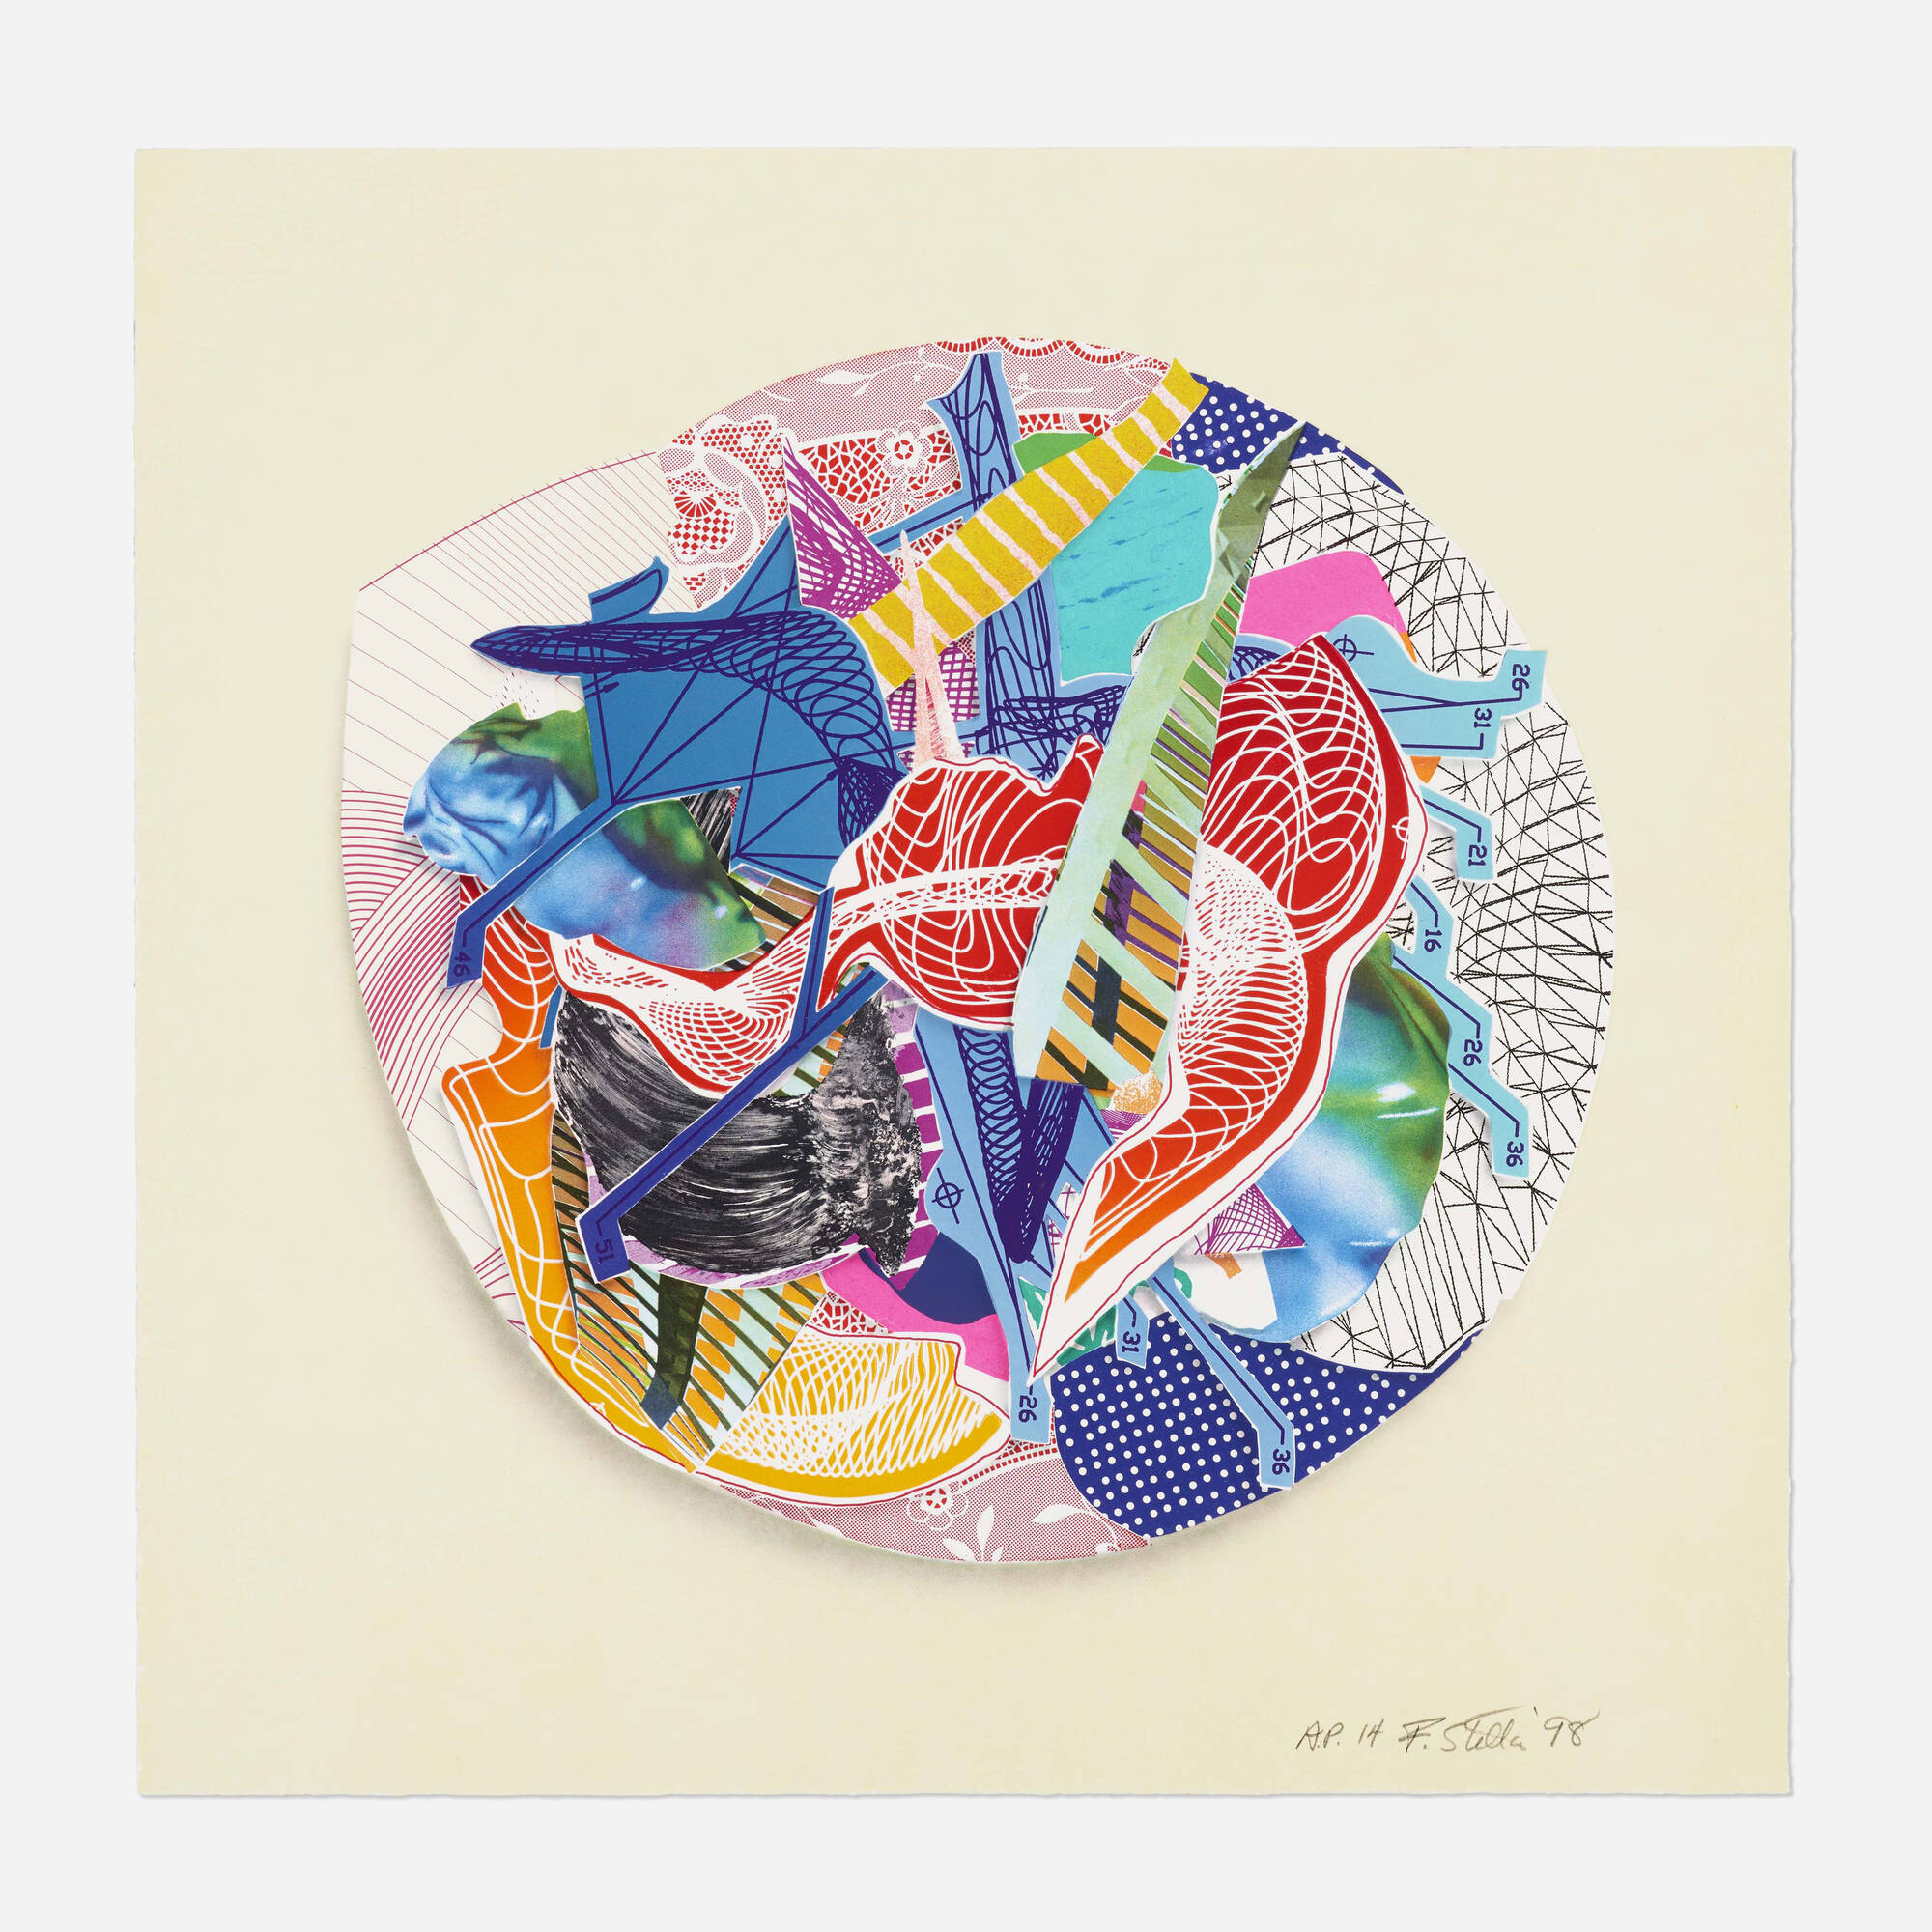 353: FRANK STELLA, Eusapia (from the Imaginary Places III